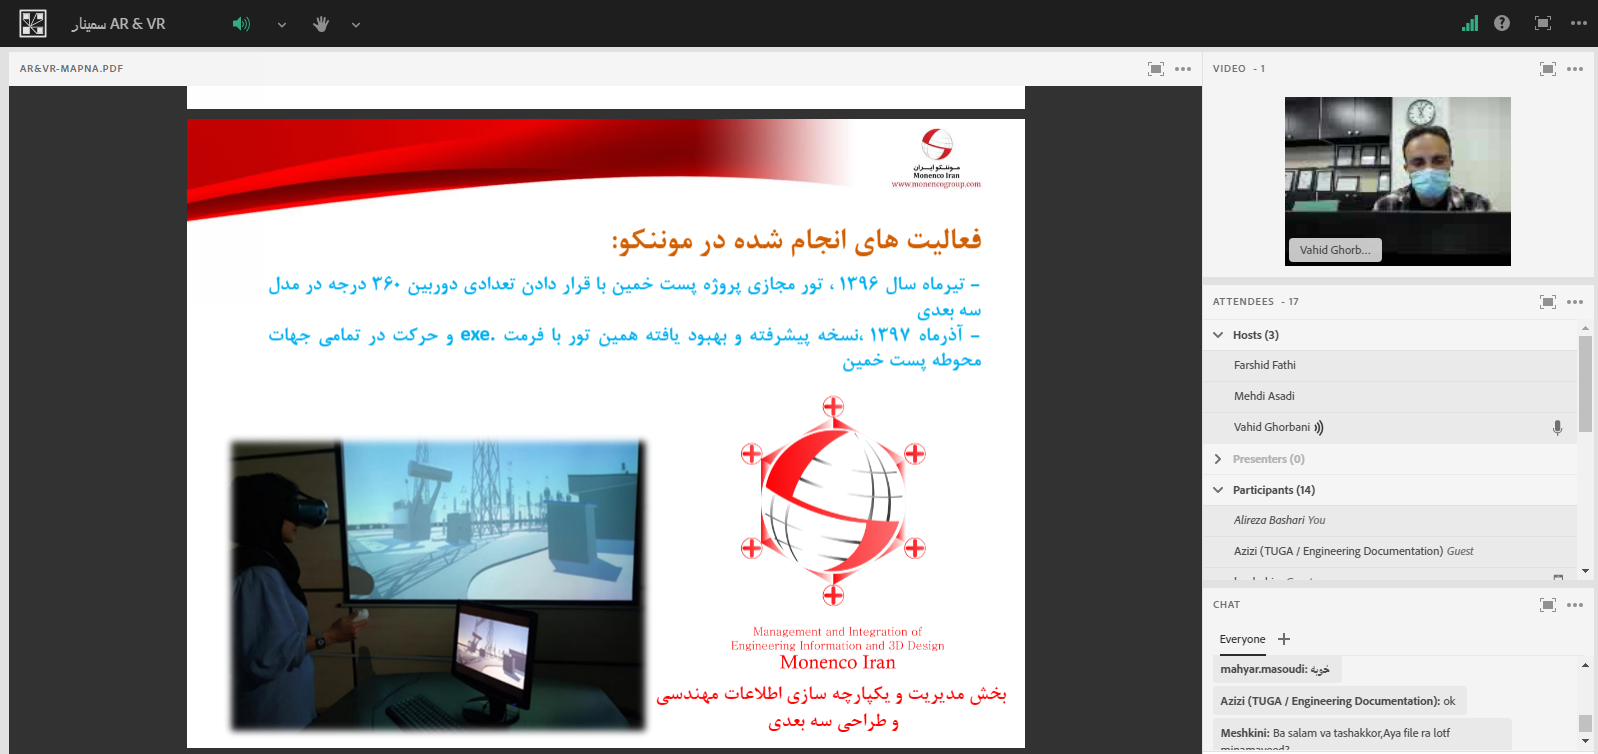 Holding a Webinar on &quotUsing AR and VR Technology in Engineering Services, Construction and Operation in Power Plant Projects" by Monenco Iran